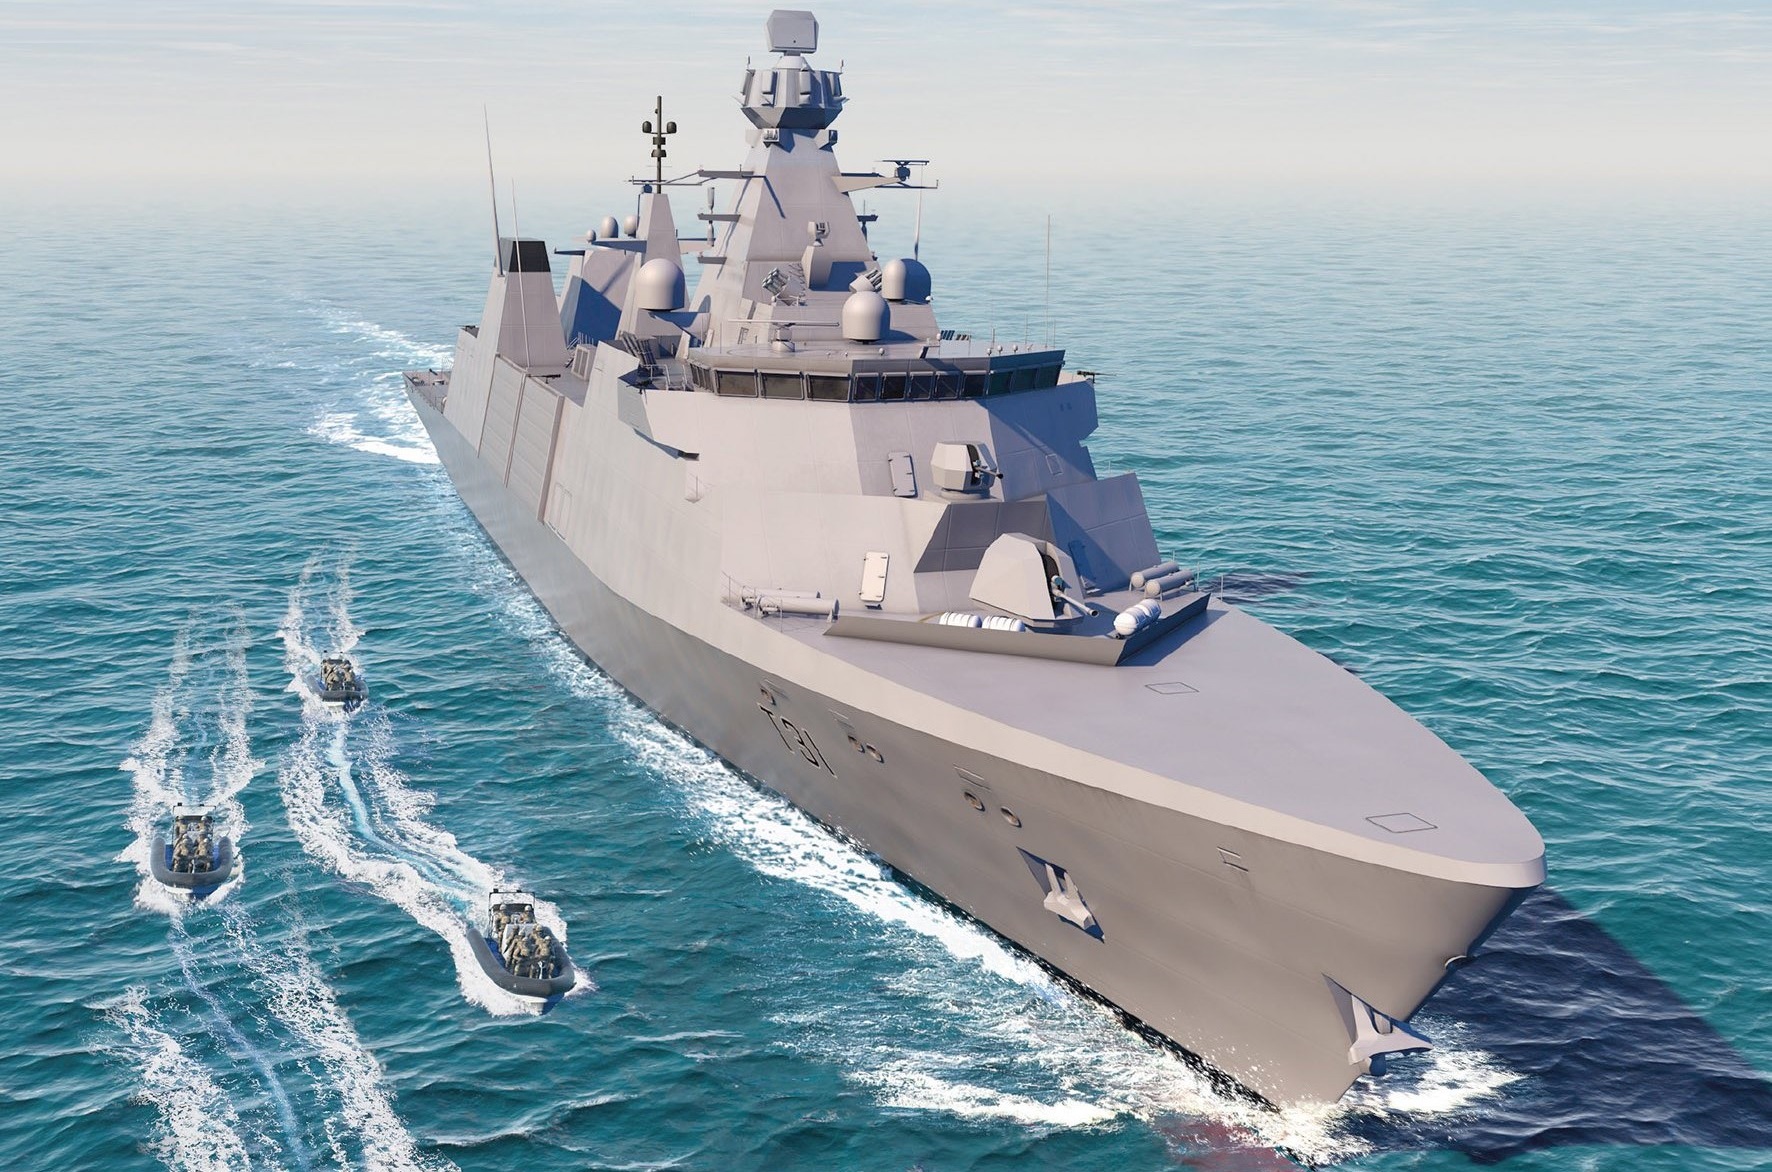 Royal Navy Orders Sixth T31 Combat Management System for Type 31 Frigate Fleet